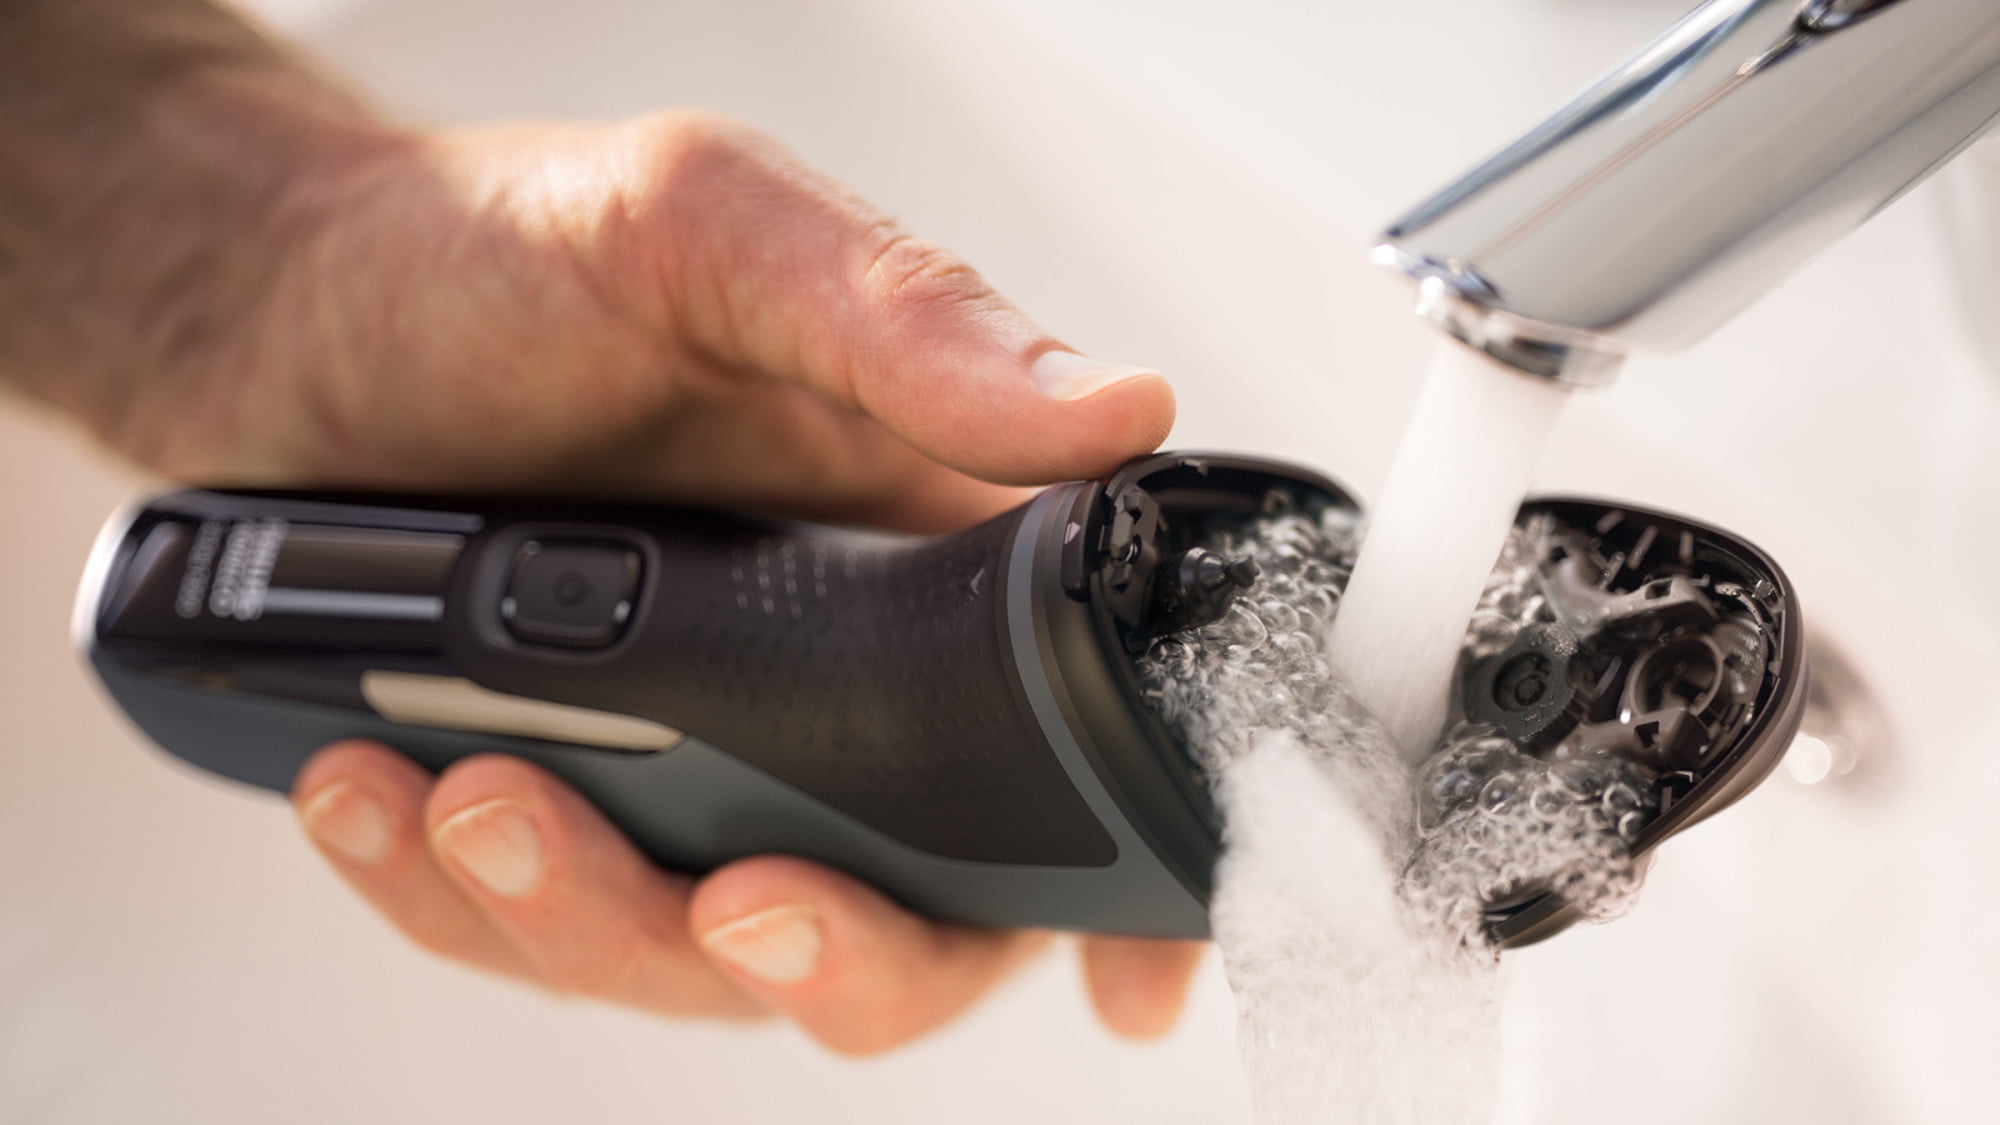 Philips Norelco Electric Shaver with Trimmer